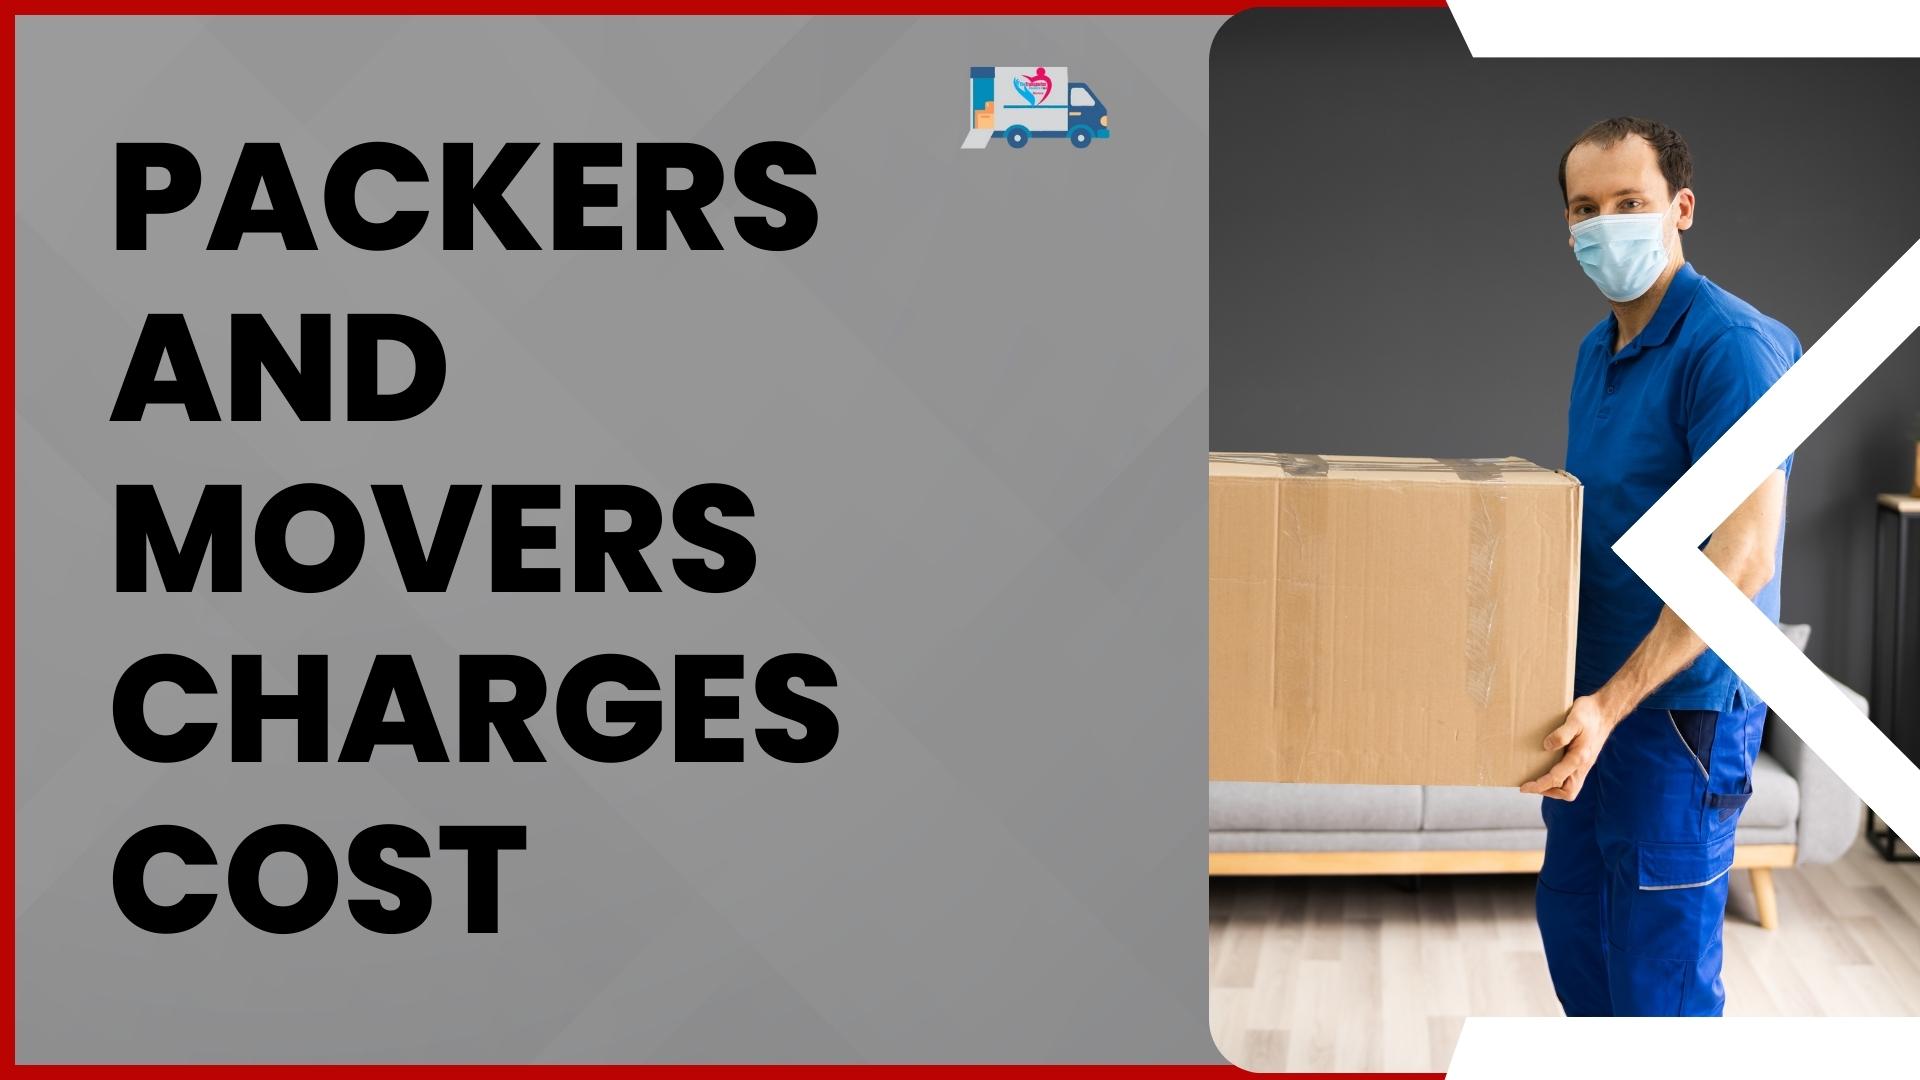 Packers and Movers offers competitive movers and packers Kochi rates and excellent services